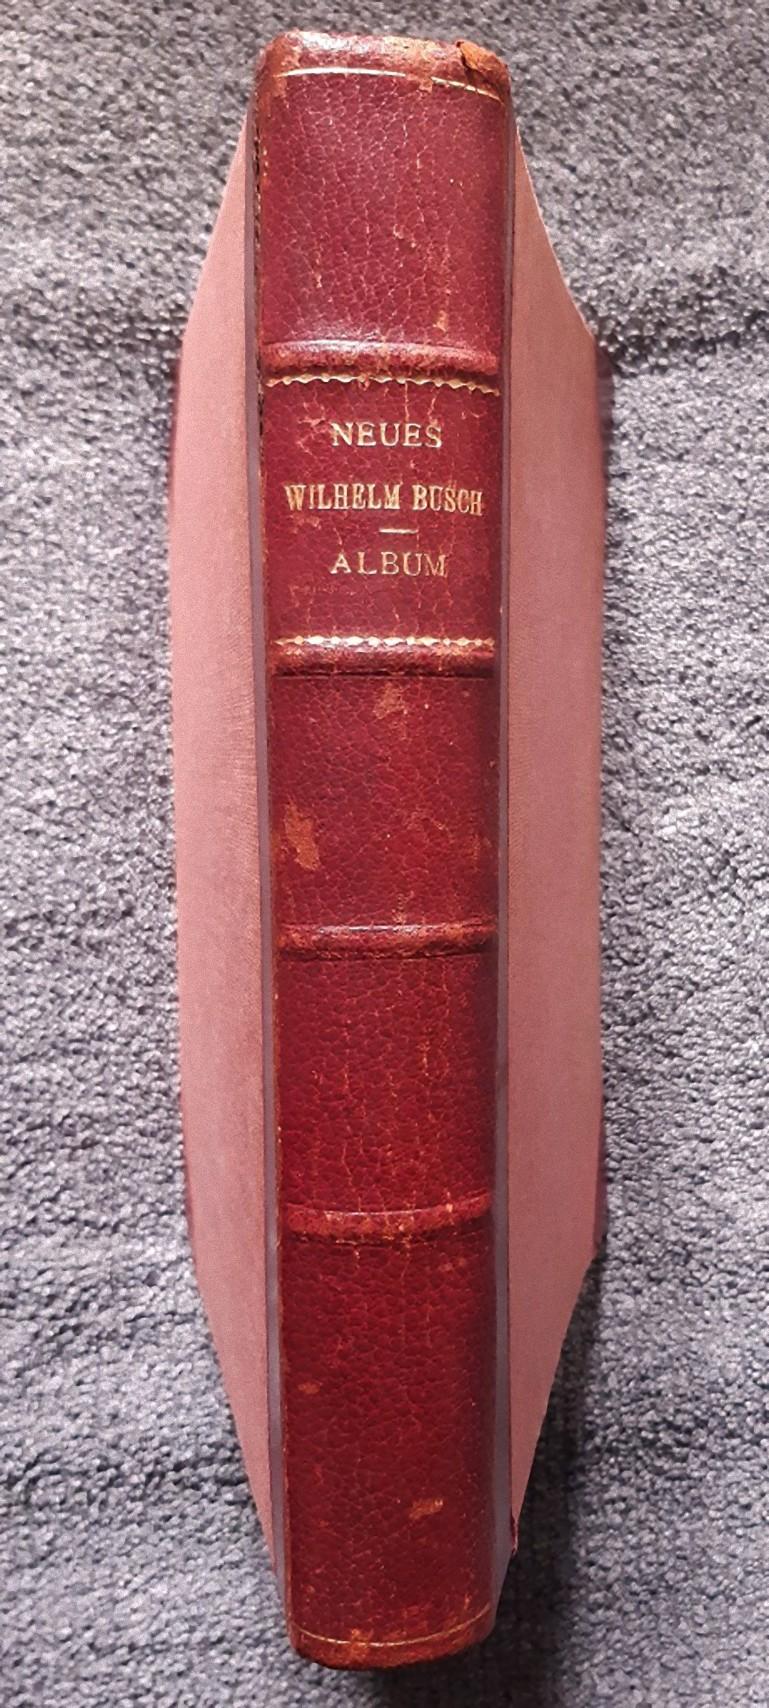 Neues Album - Rare Book Illustrated by Wilhelm Busch - 1925 For Sale 4